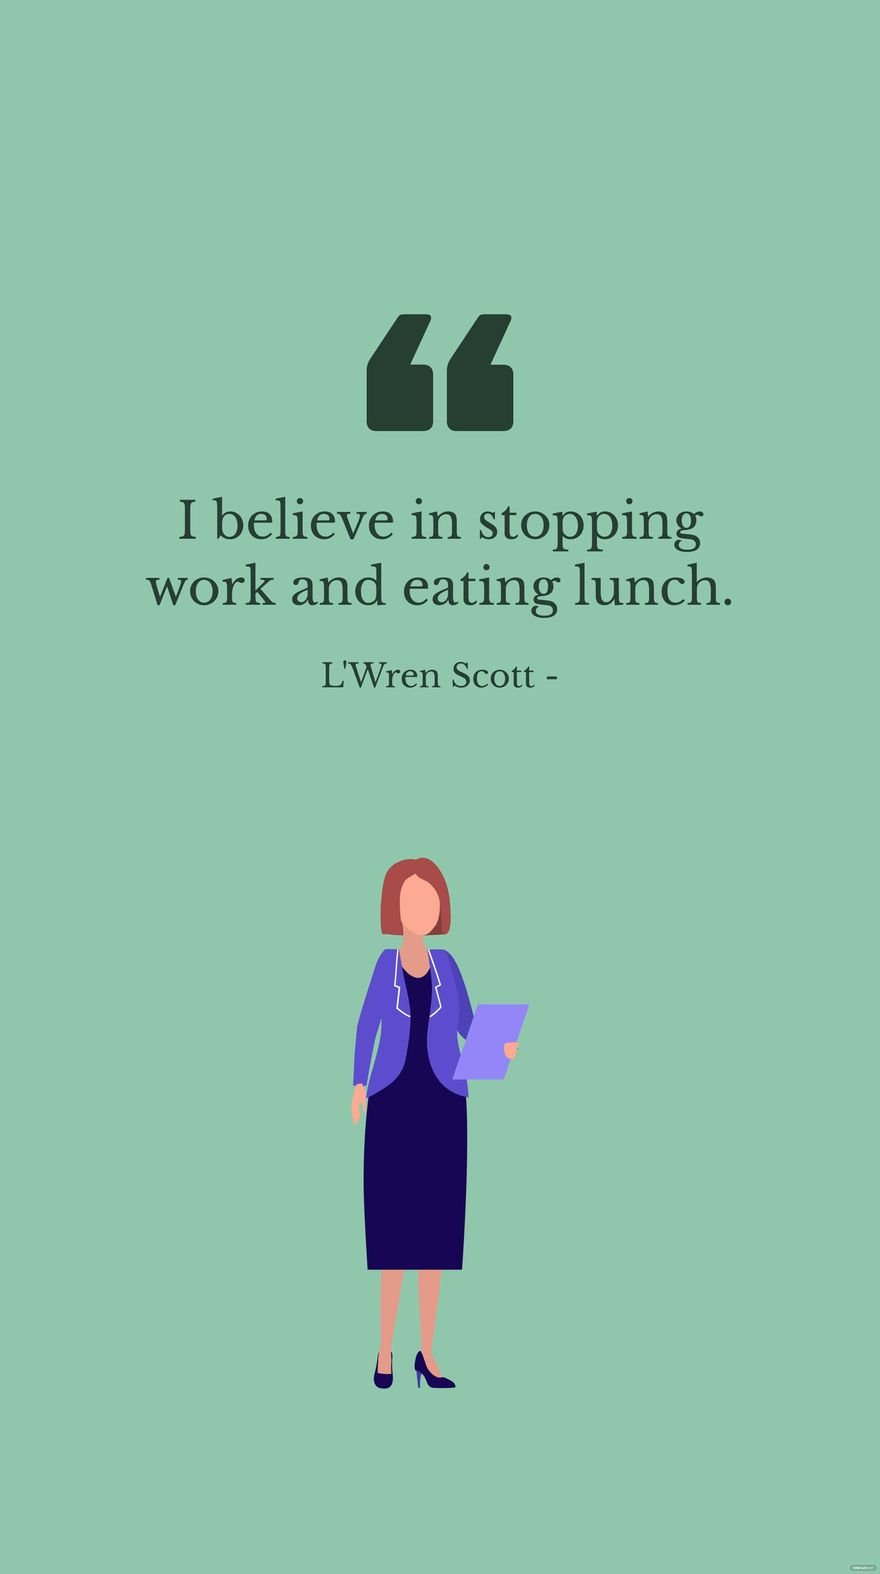 L'Wren Scott - I believe in stopping work and eating lunch. in JPG